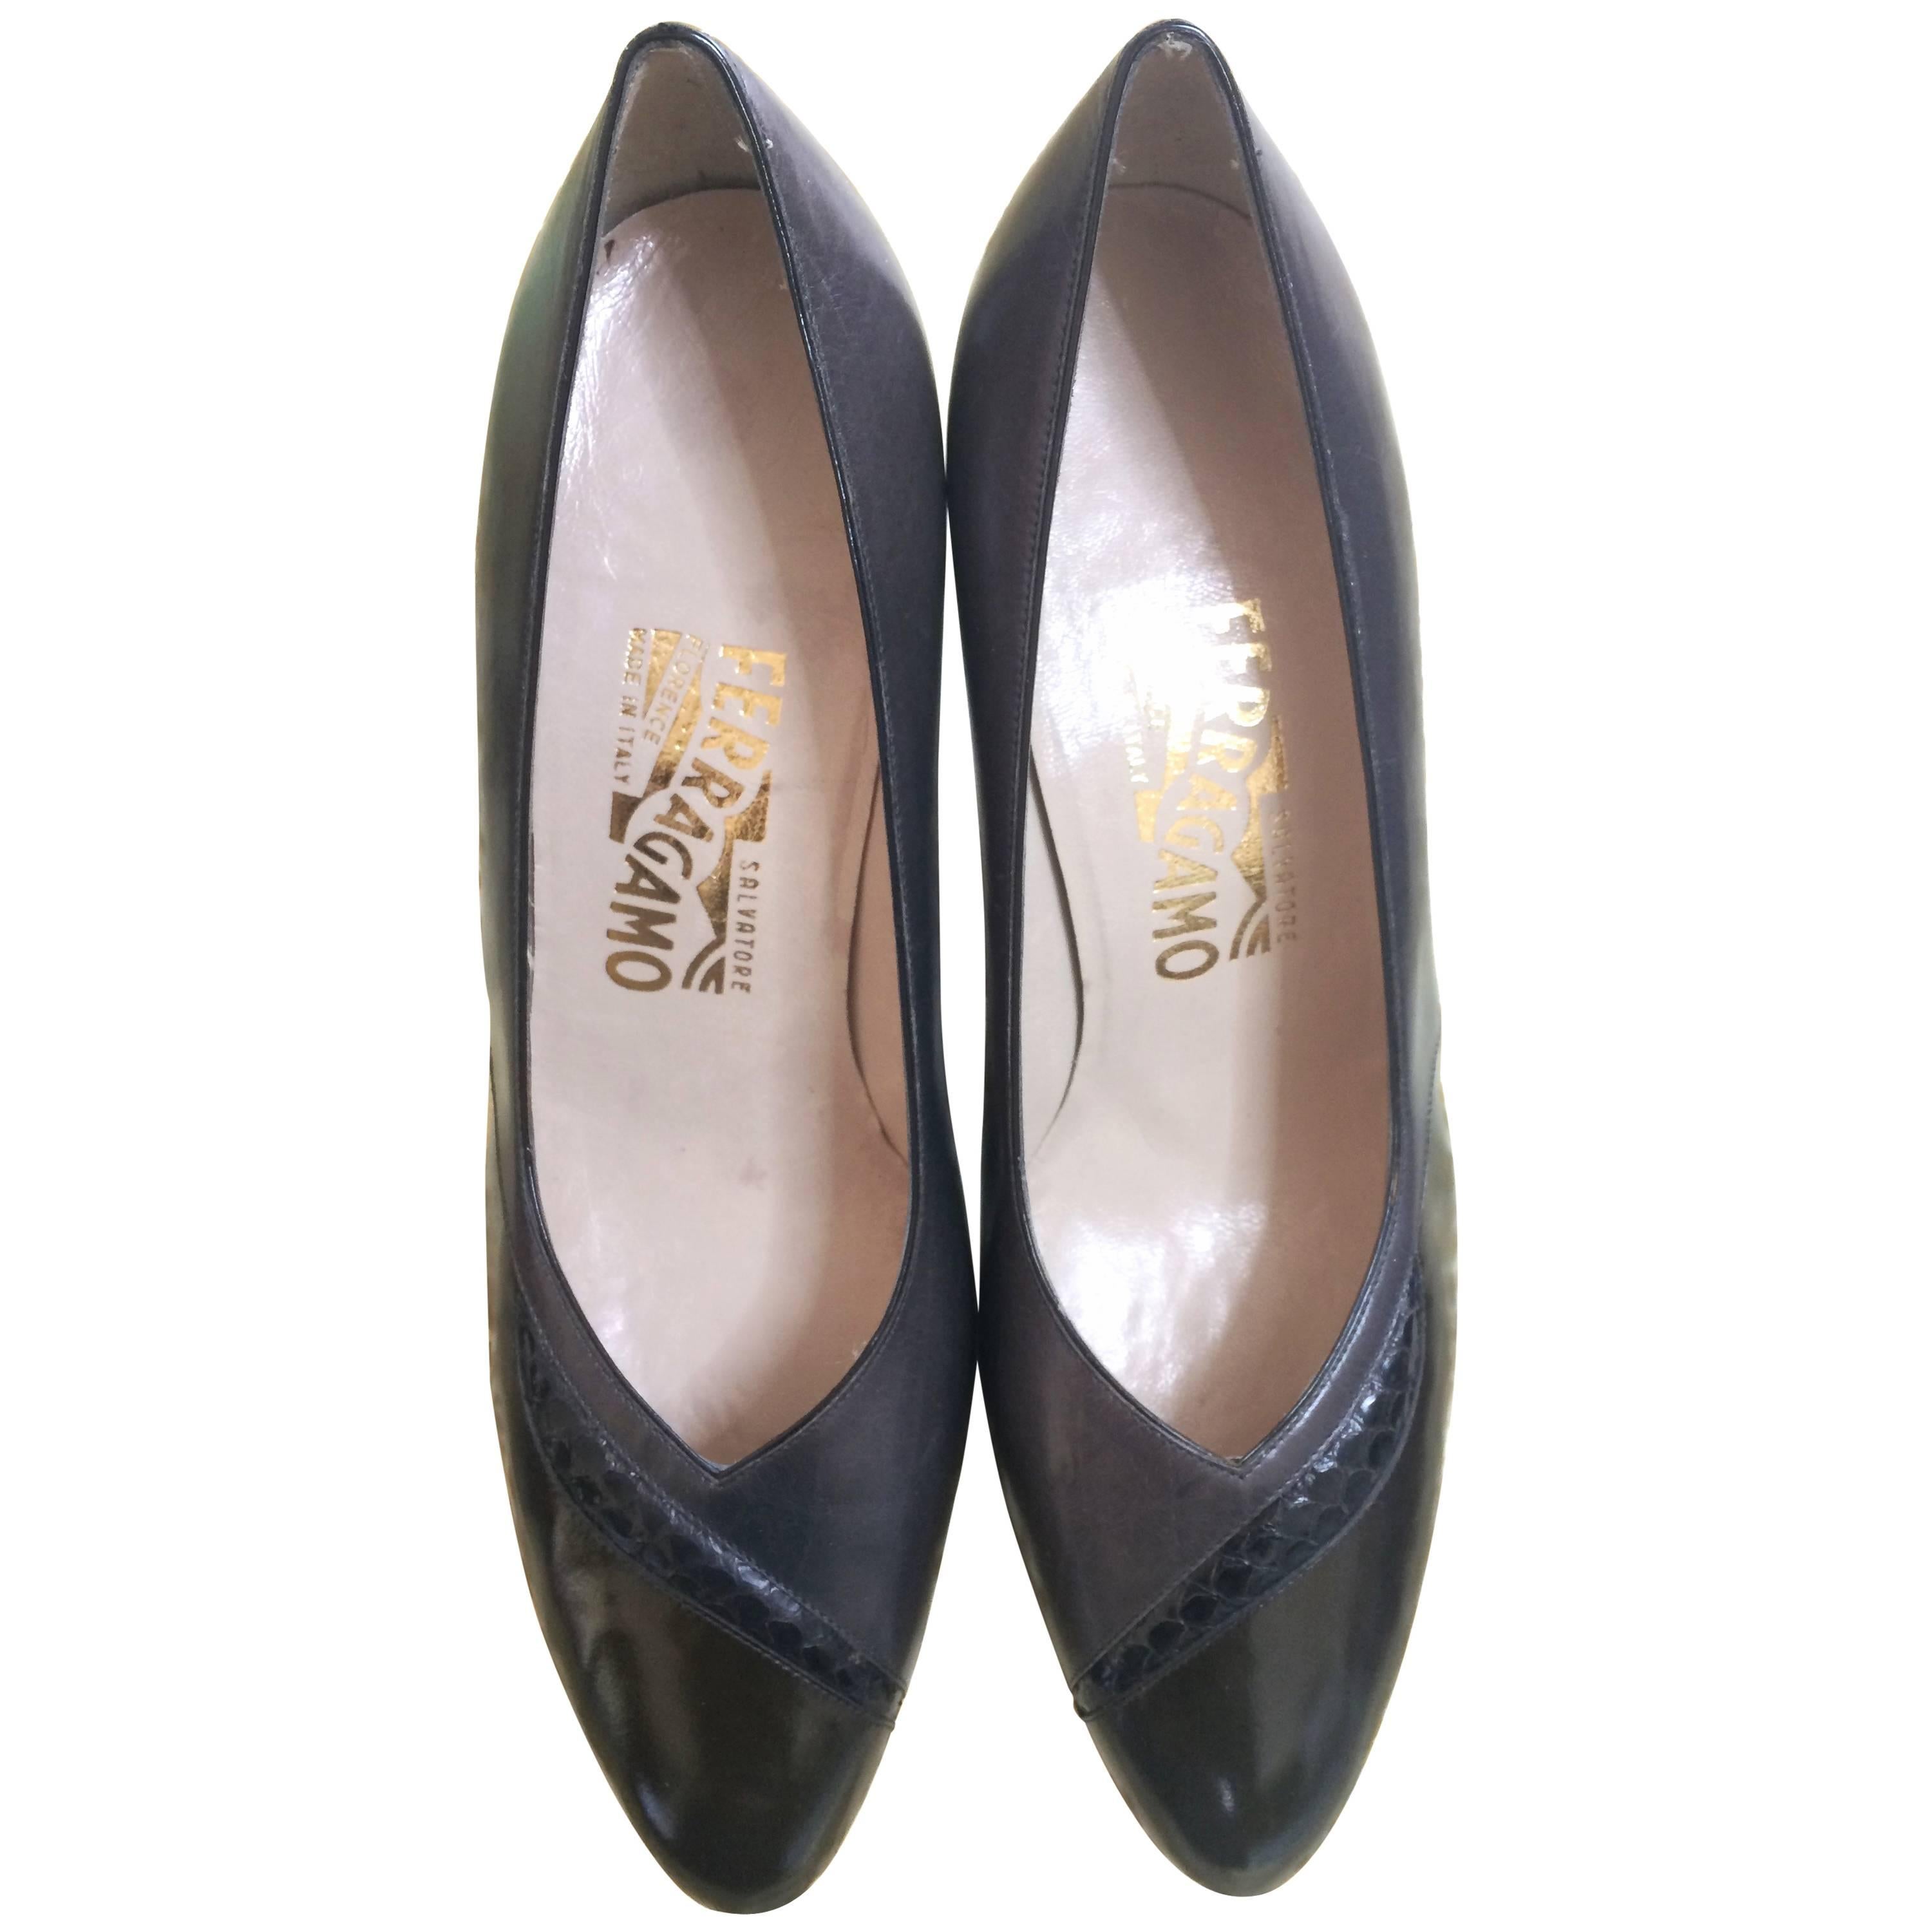 Vintage Salvatore Ferragamo grey and dark brown leather pumps with snakeskin. 8D For Sale